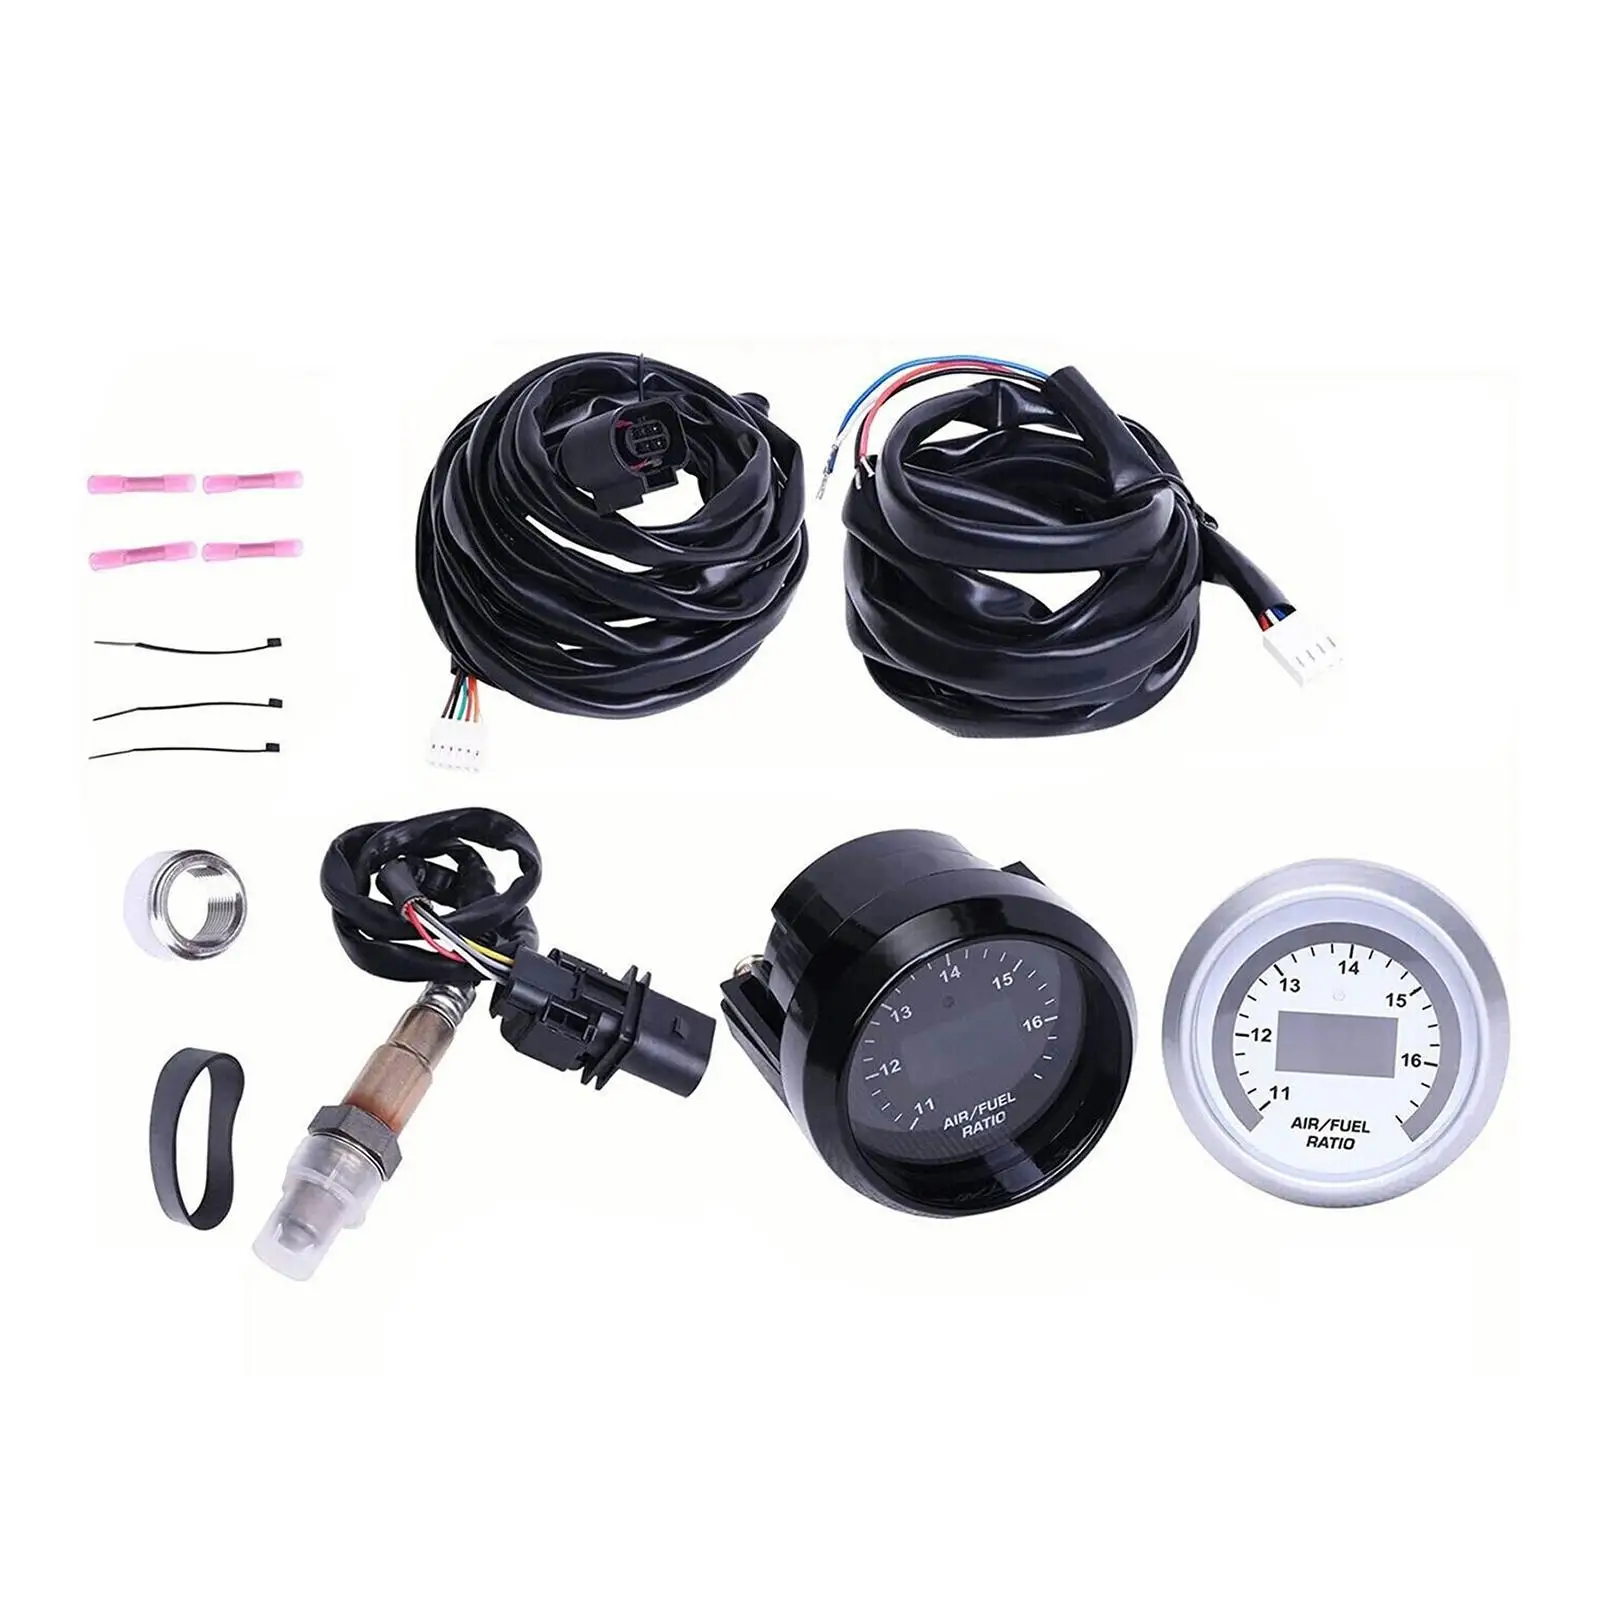 Air Fuel Ratio Gauge Kit Accessory Replaces Easy Installation Spare Parts Easy to Read Repair Parts 30-4110 Controller Gauge Set